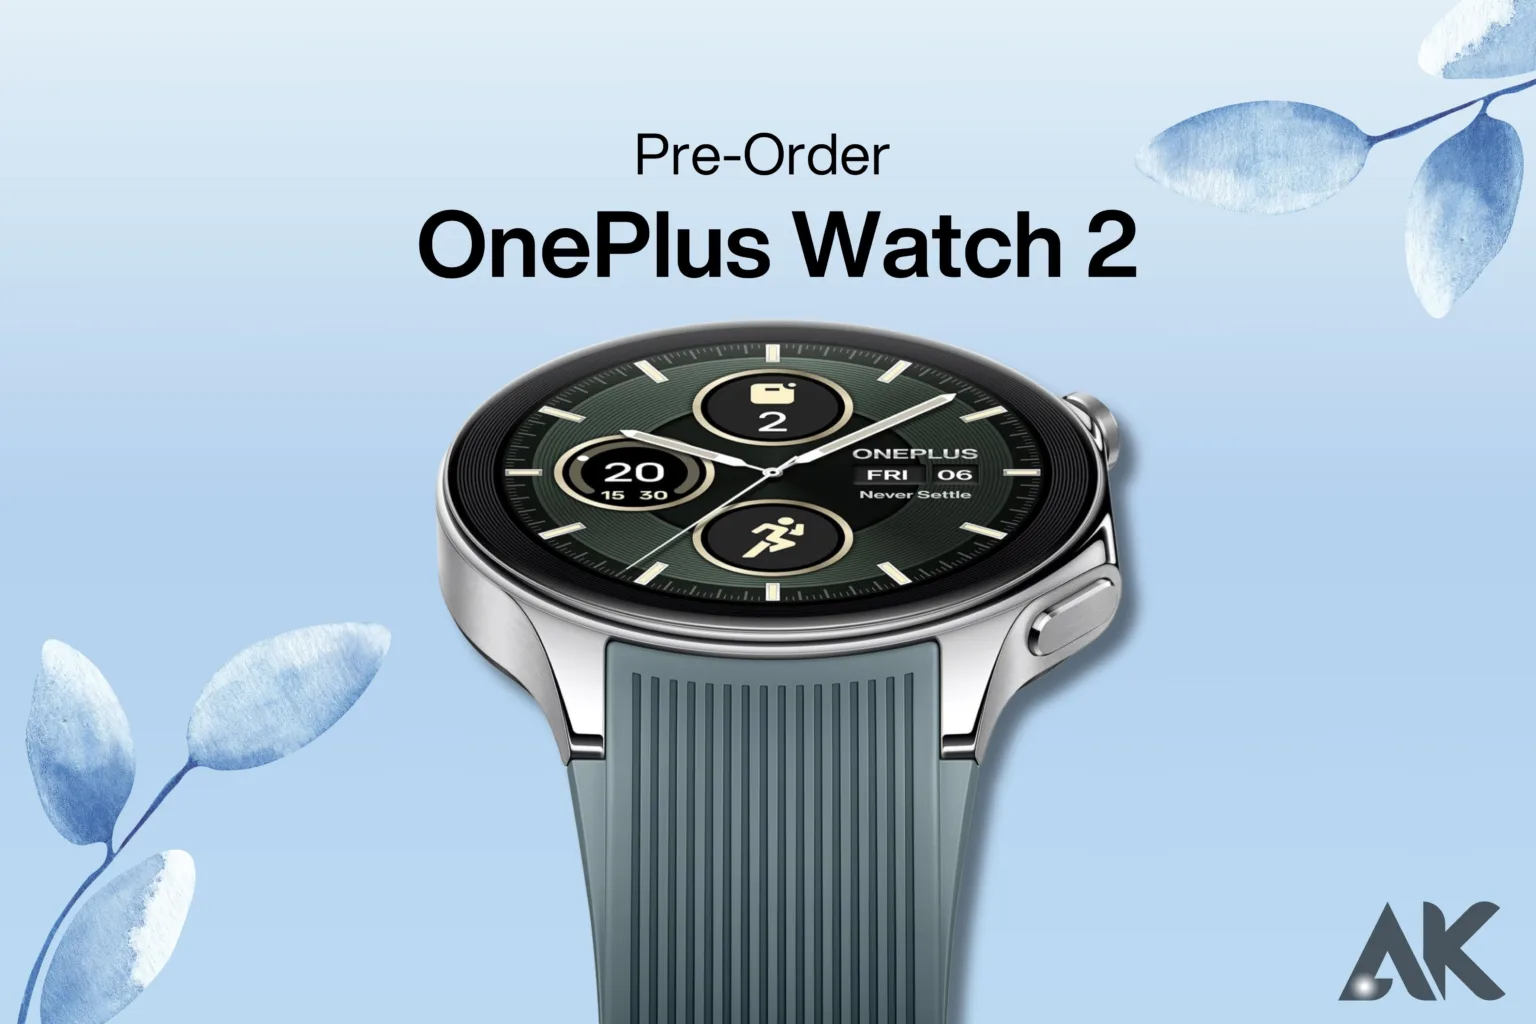 How to pre-order OnePlus Watch 2